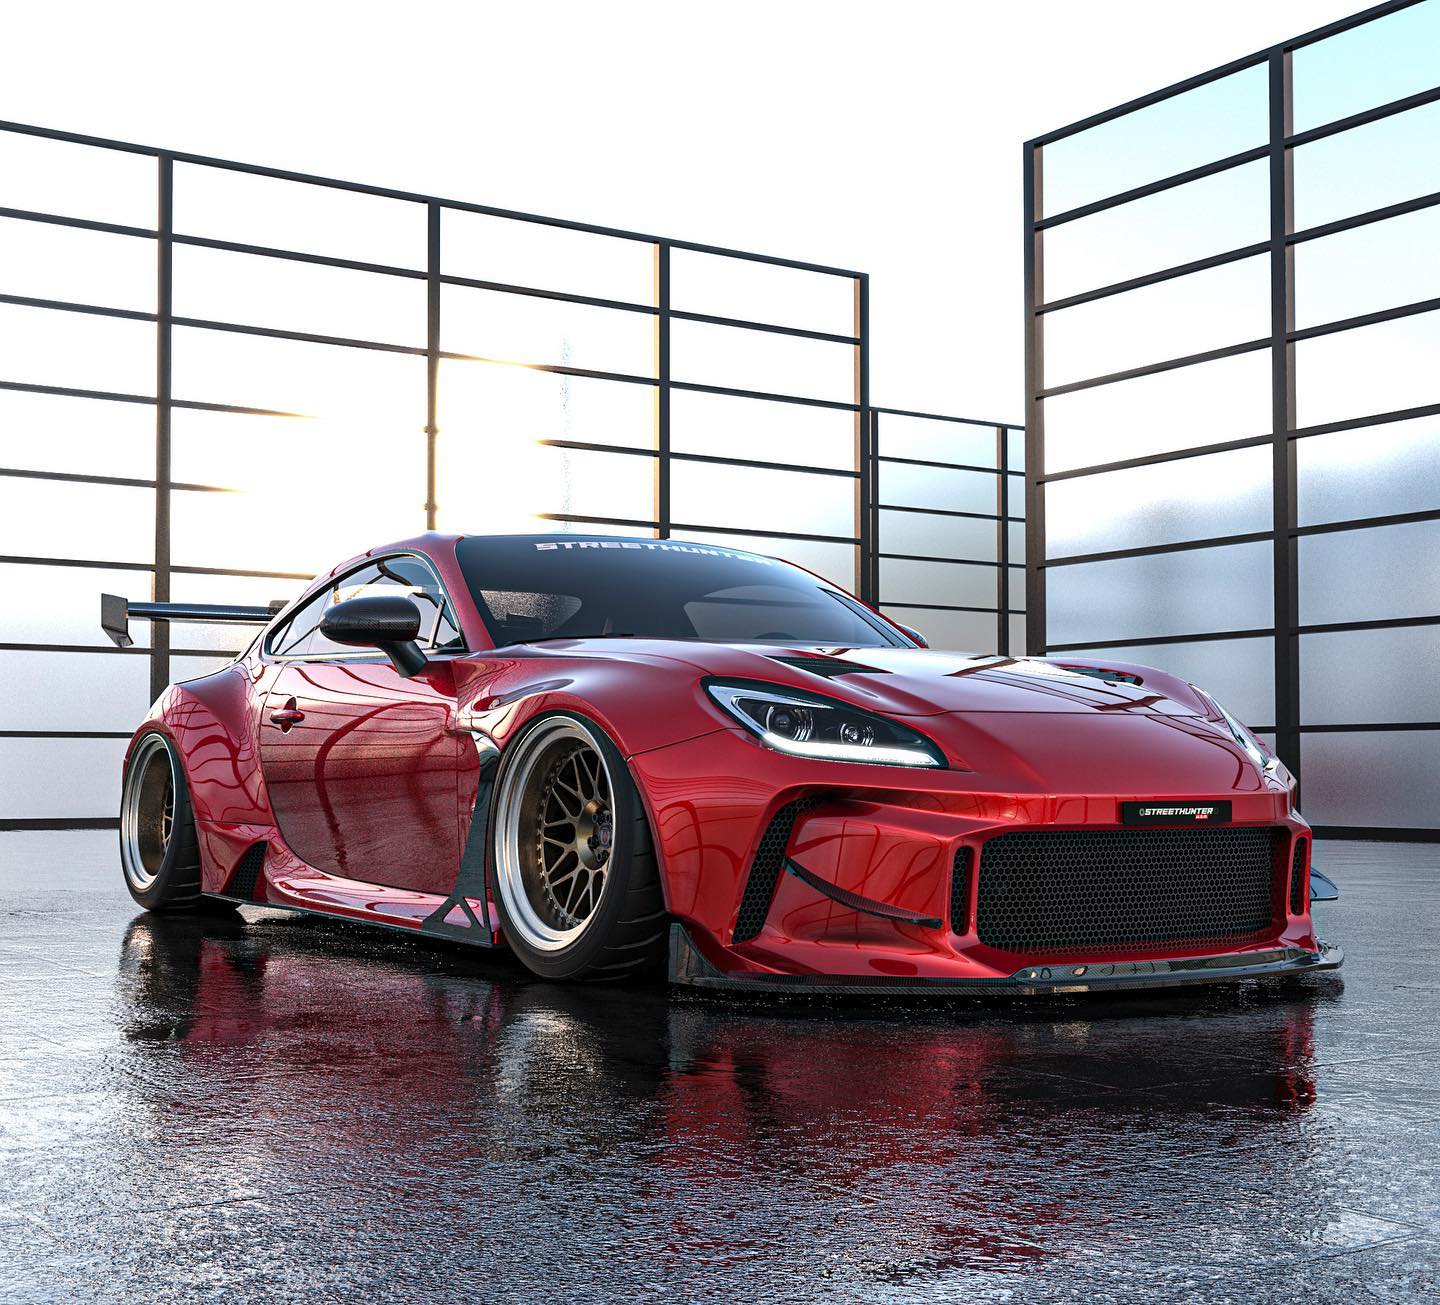 Check Out The Full Brz And Gr86 Widebody Kit By Streethunter Designs